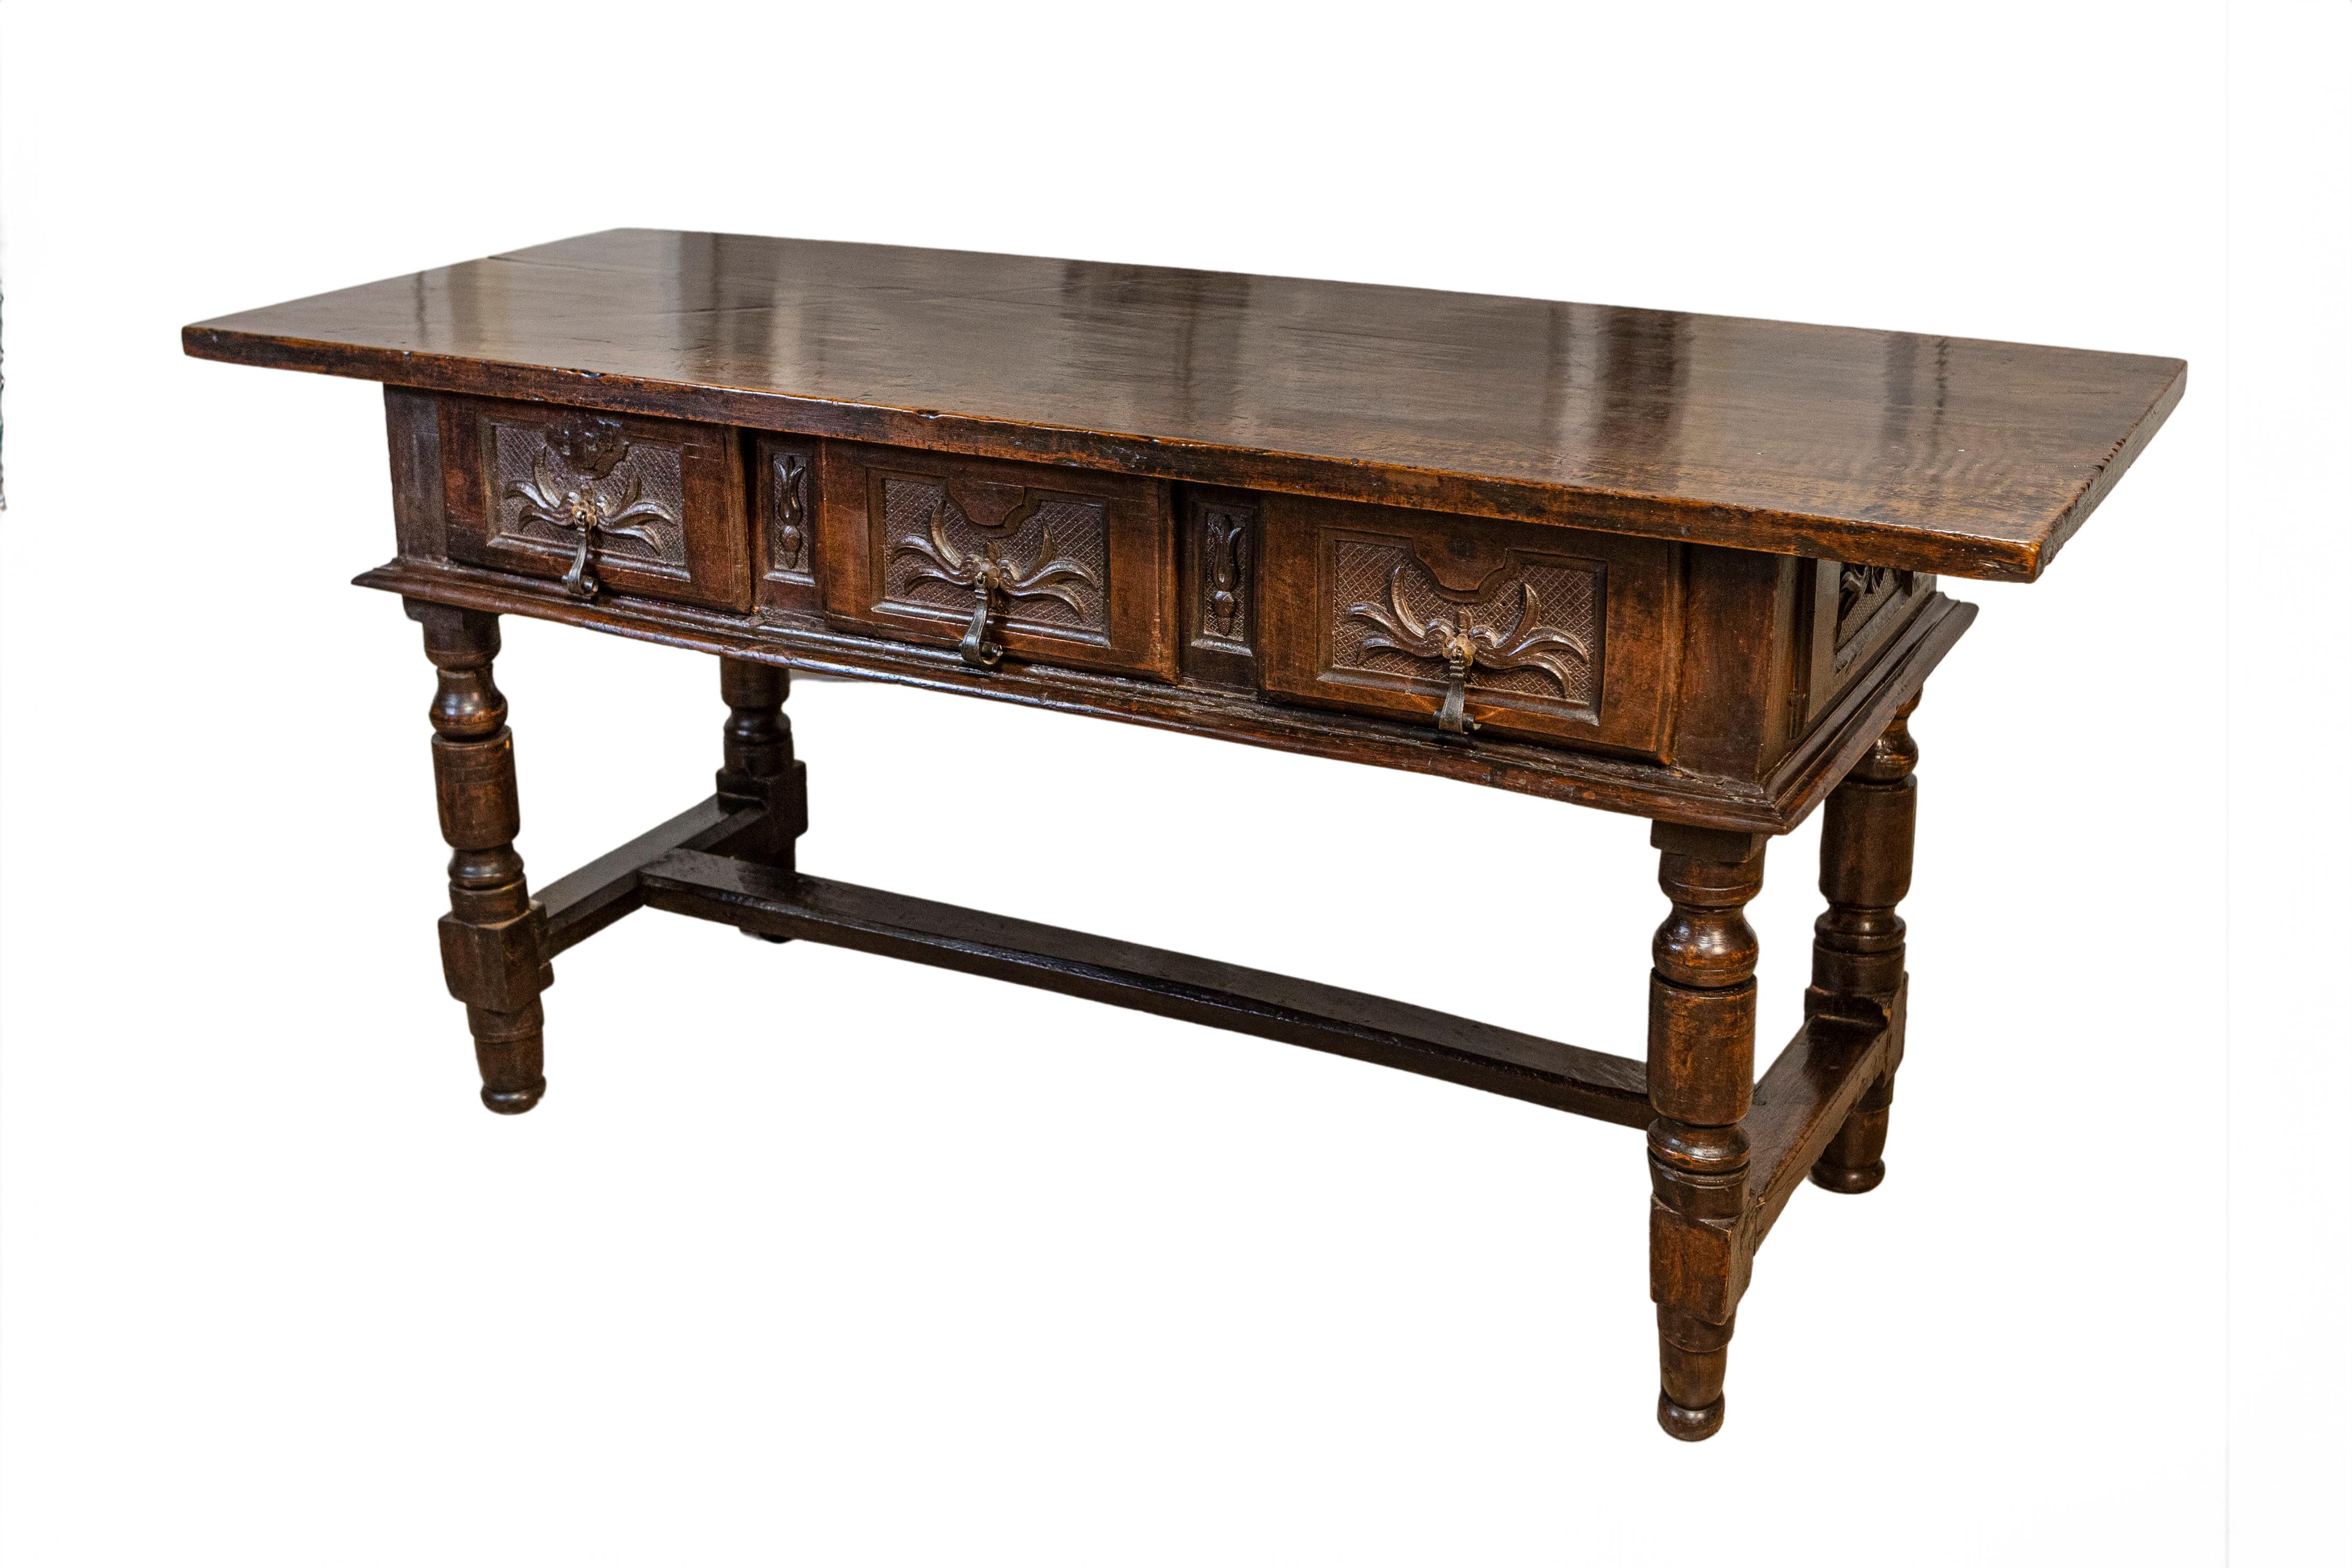 A Spanish Baroque period walnut table from the 17th century with three drawers, carved foliage on crosshatched motifs, turned legs and H-Form cross stretcher. This 17th-century Spanish Baroque period walnut table exudes a rich historical charm with